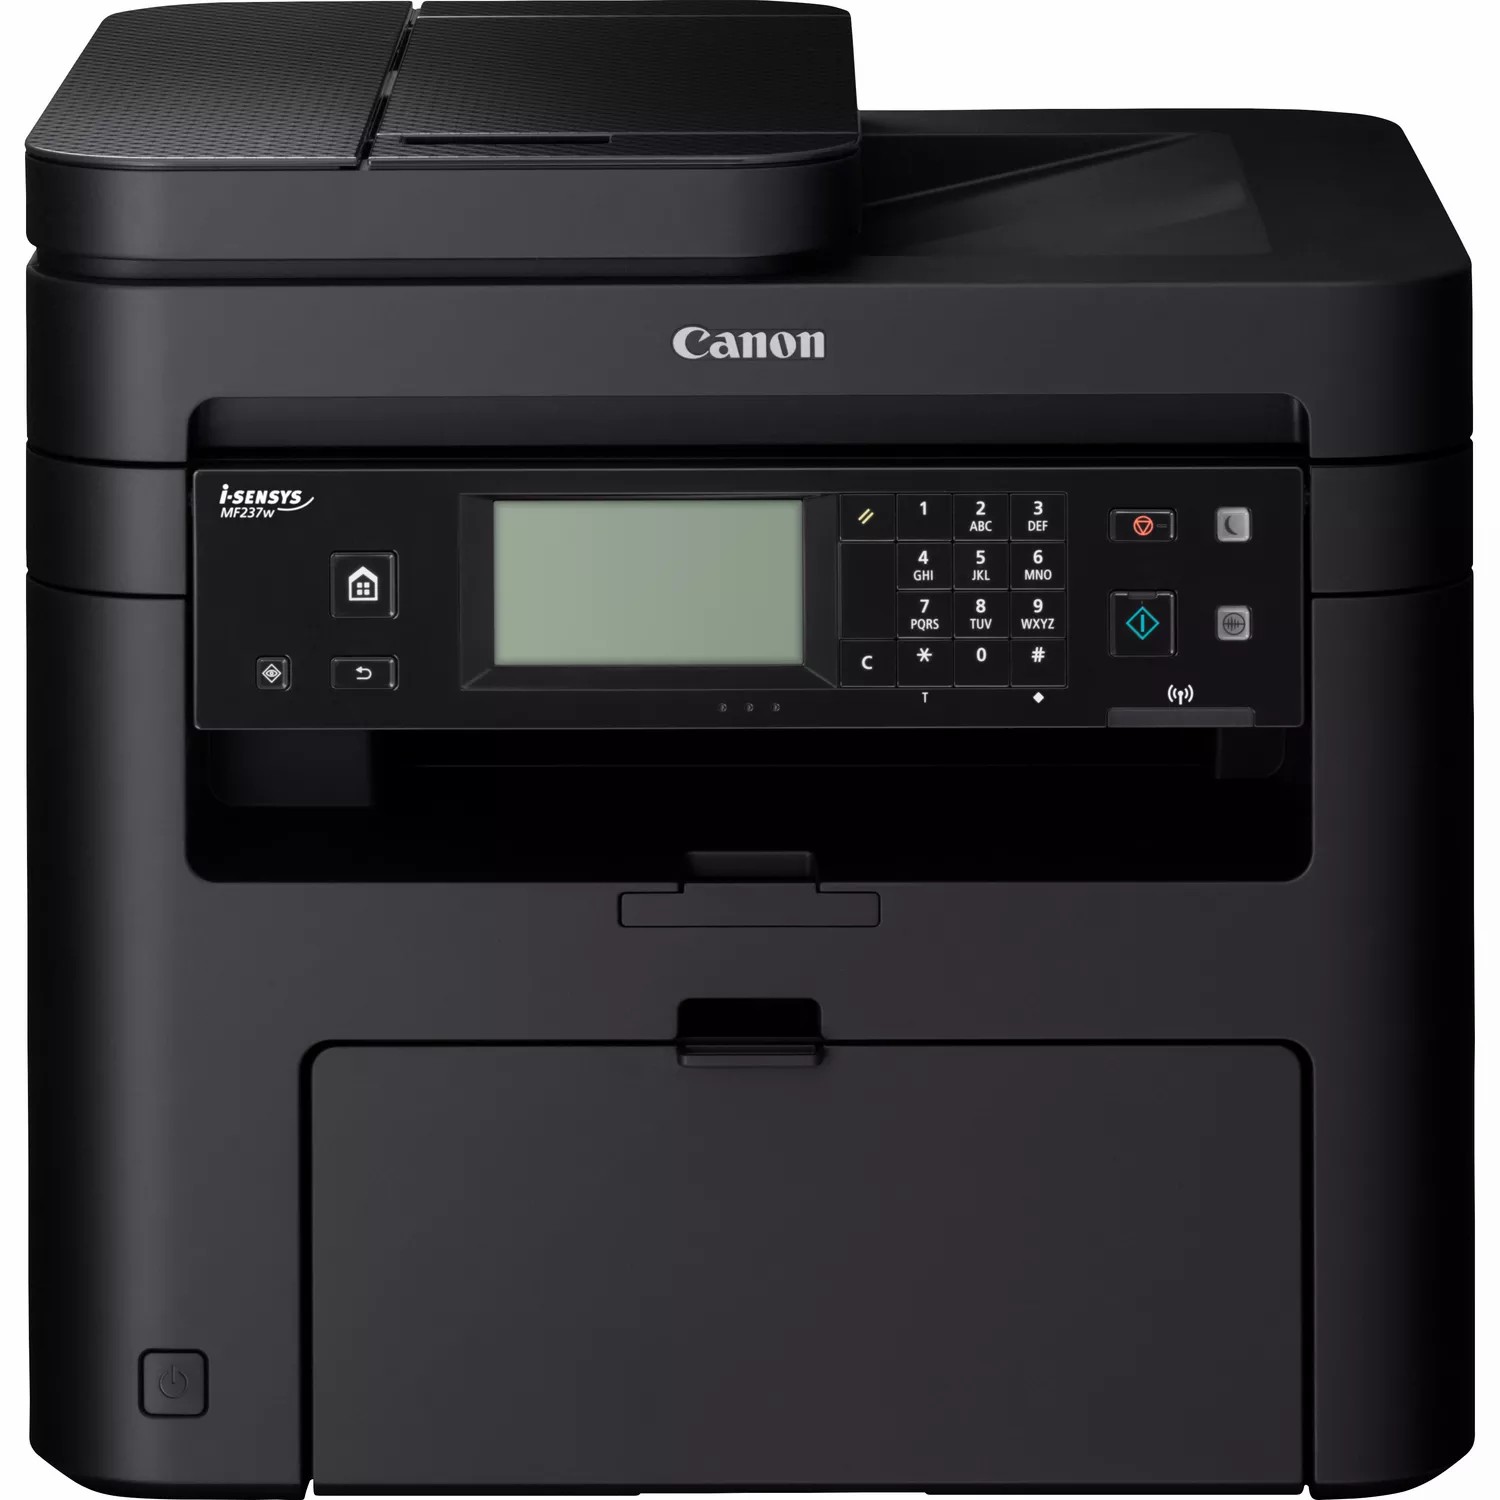 Canon imageCLASS MF237w Compact All-in-One (Print, Copy, Scan, Fax) with wireless connectivity